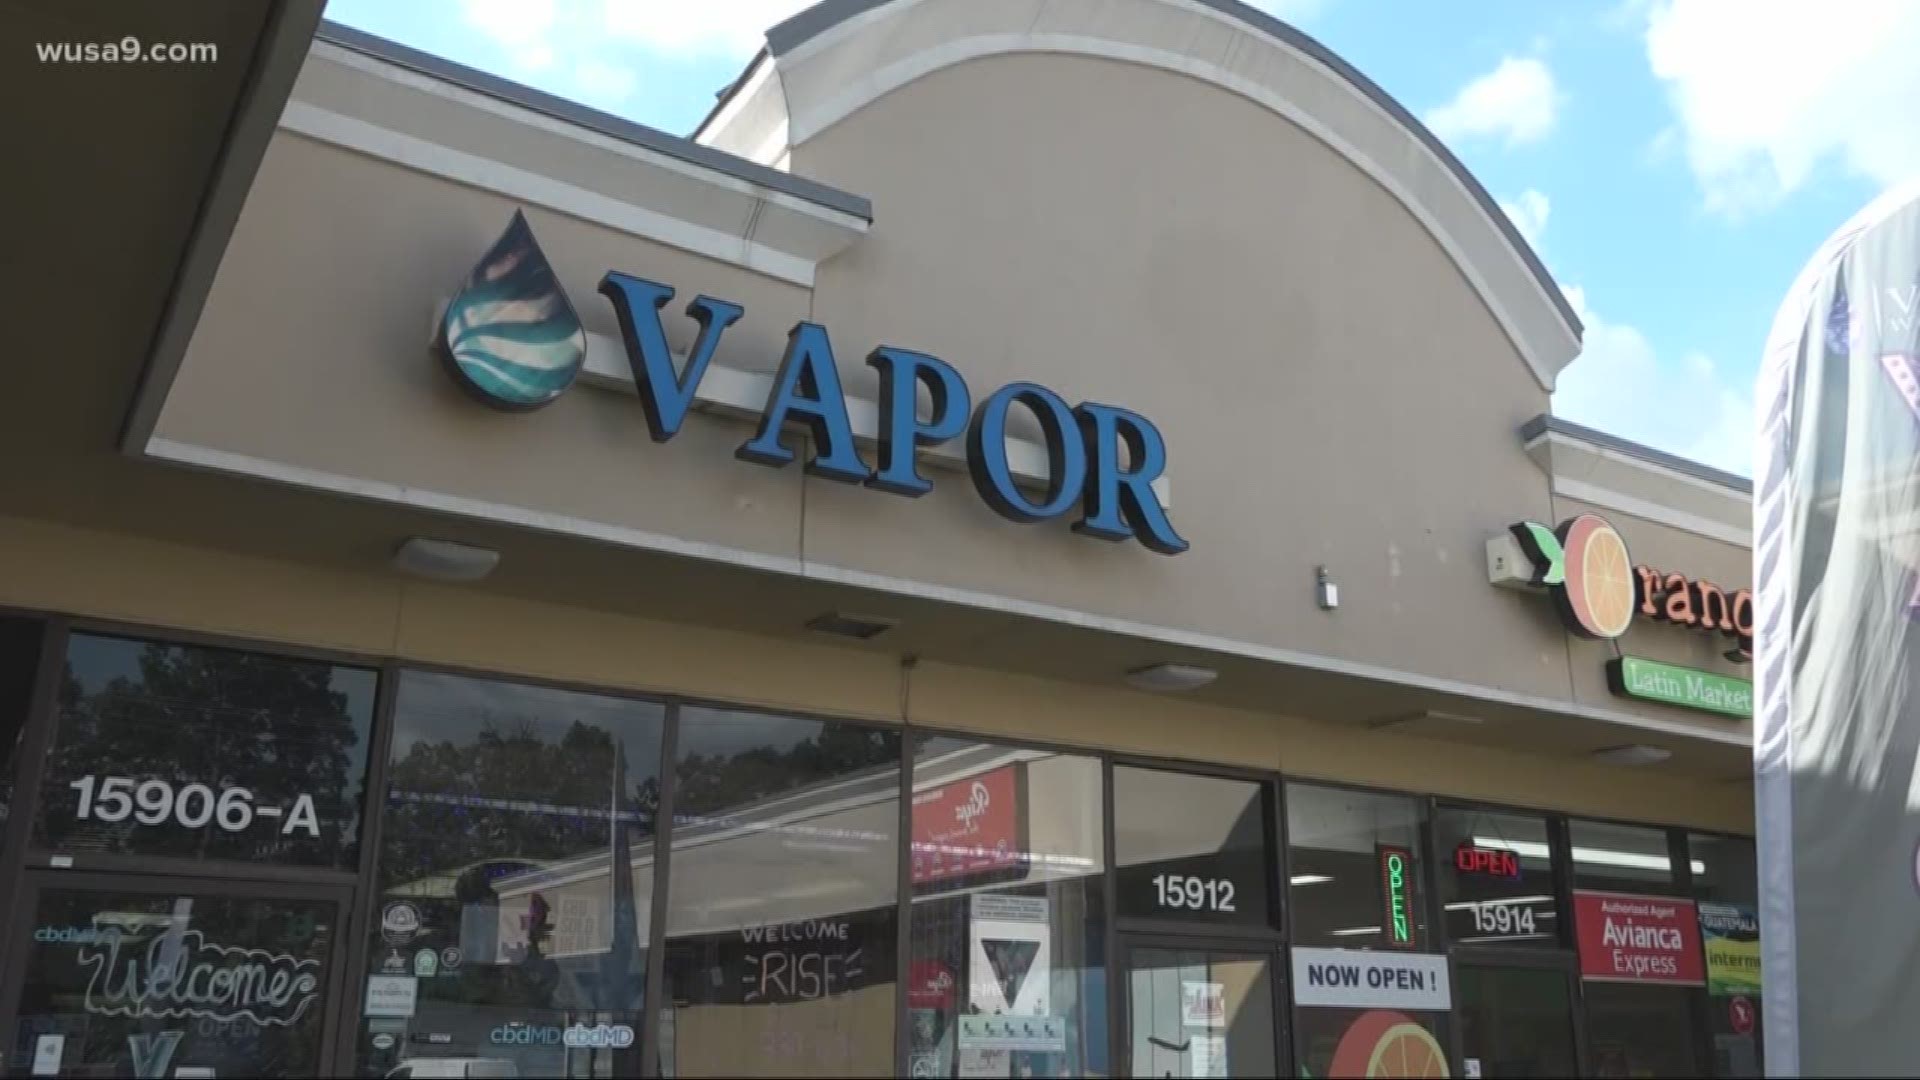 The owner of Vapor Worldwide reports his business is down 35% even though no products with vitamin E acetate are sold.